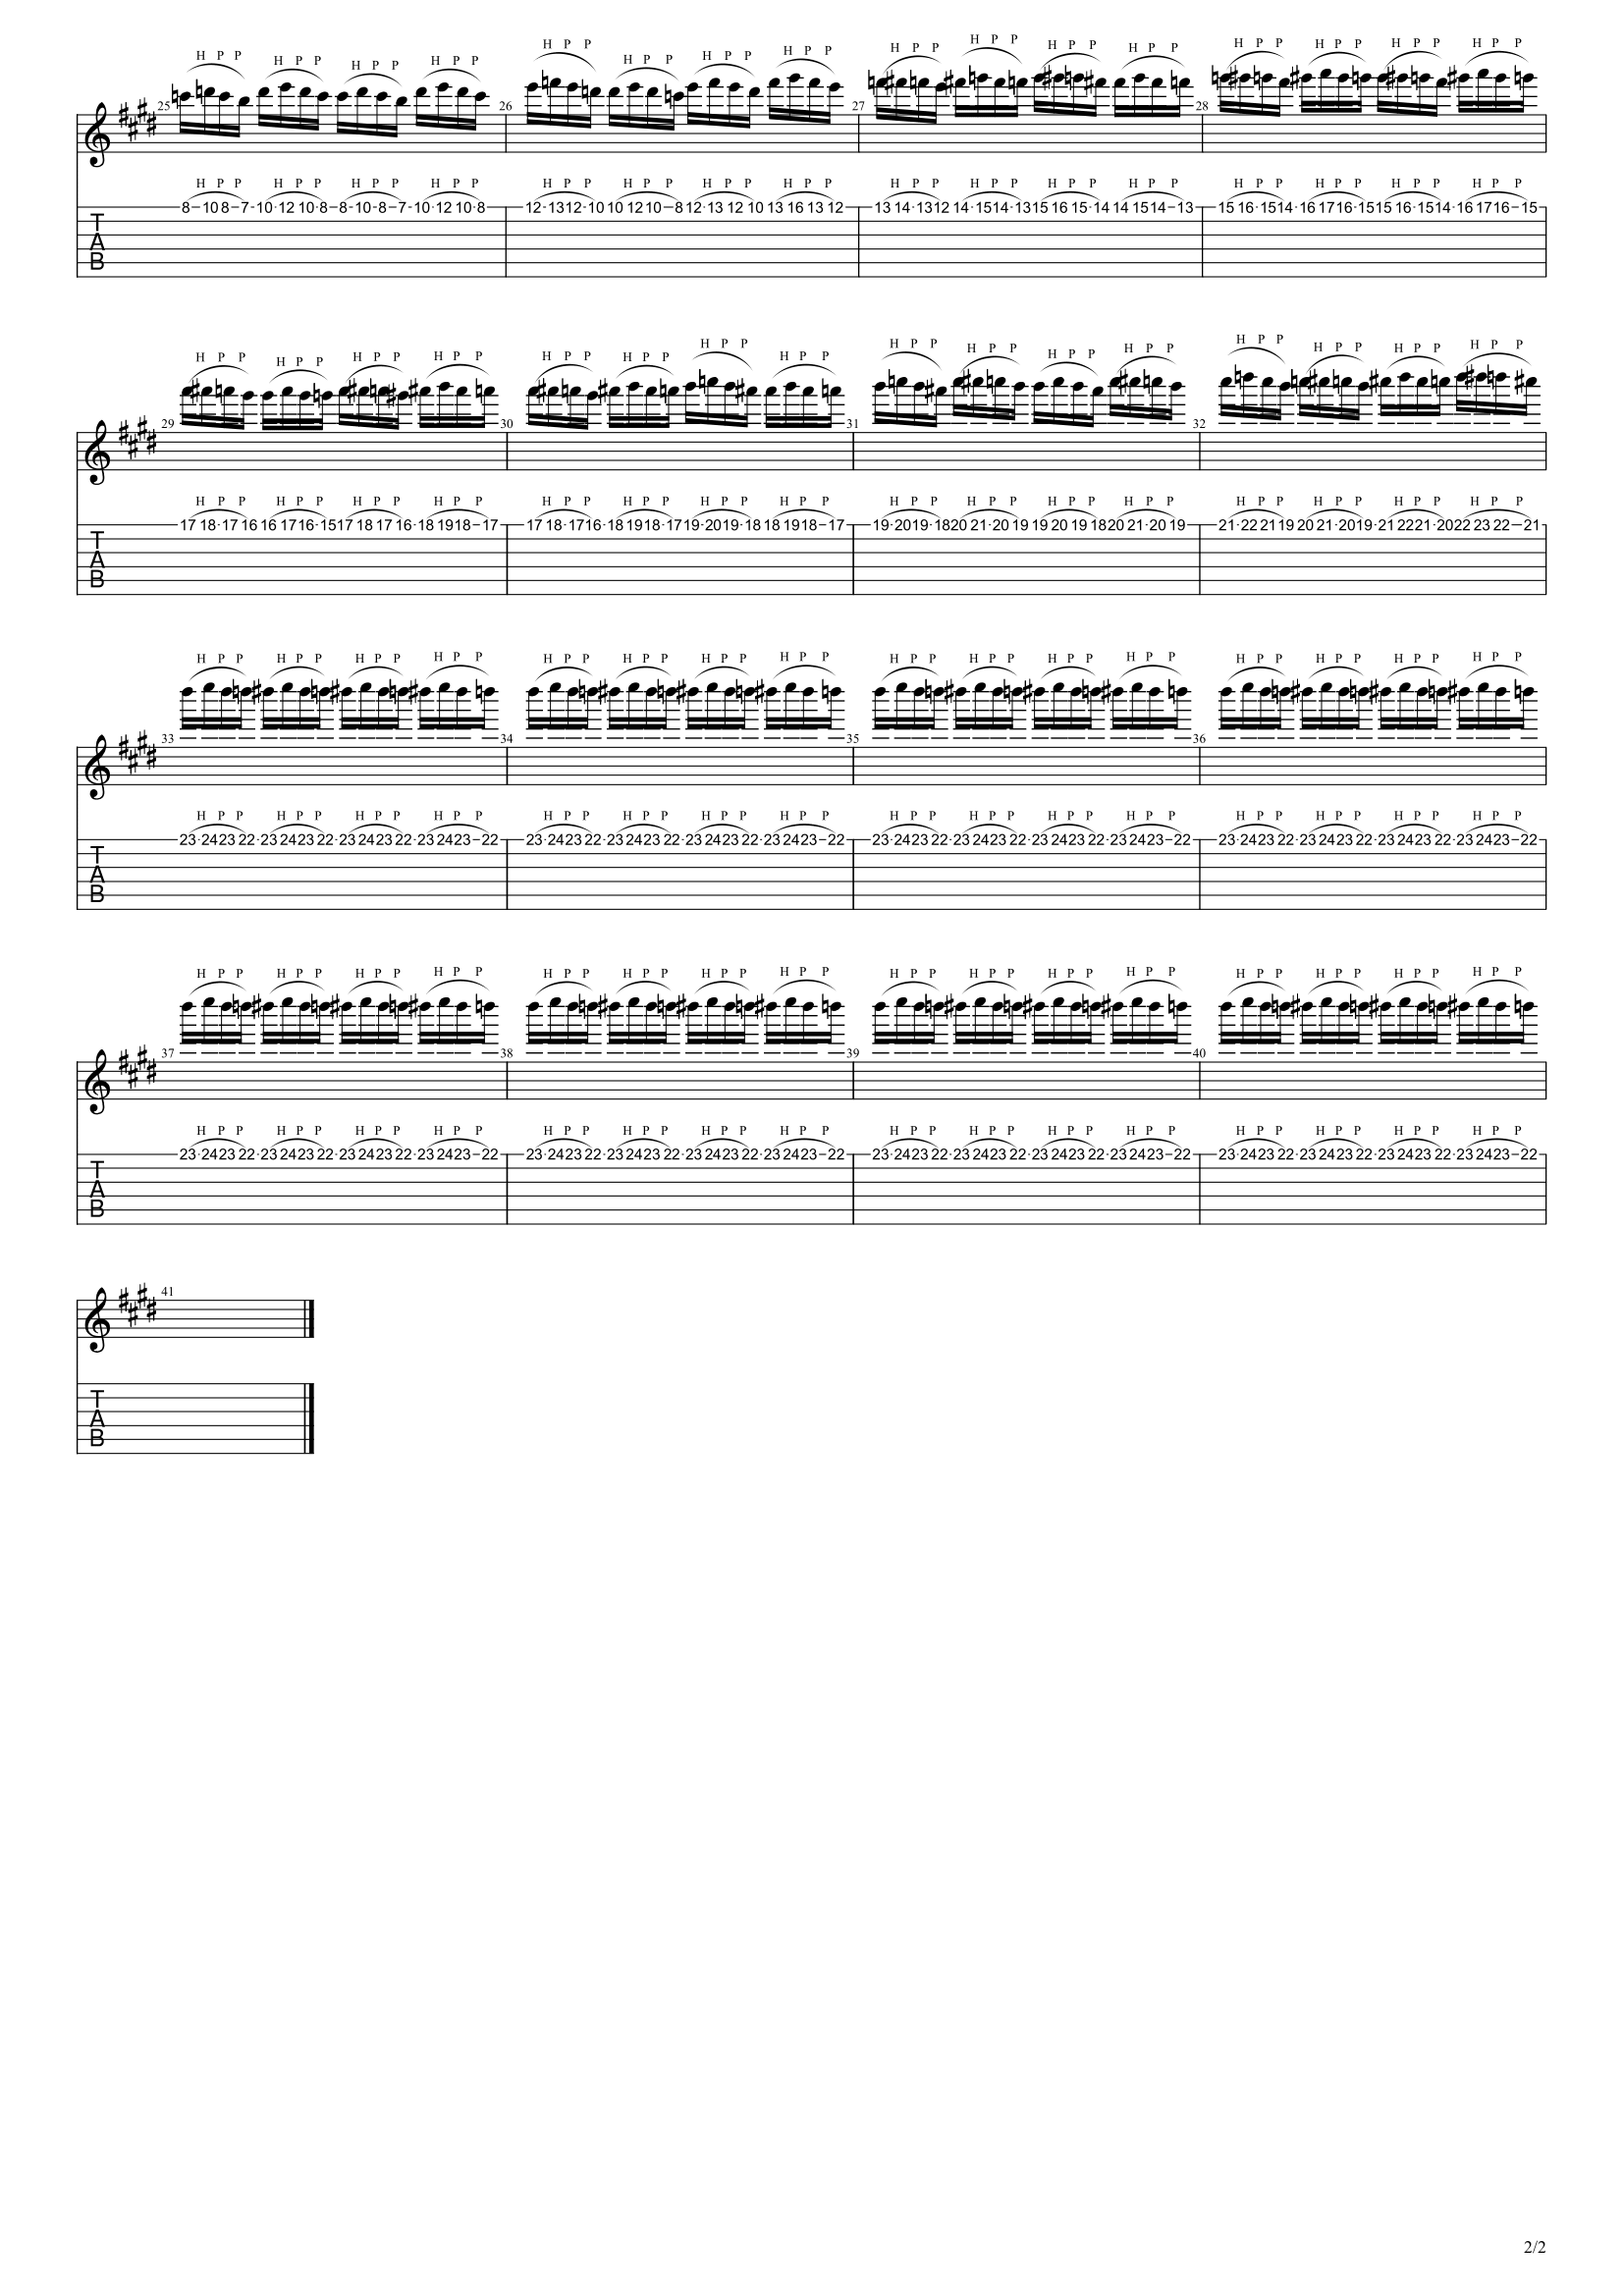 【TAB】In the Name of God Solo / Dream Theater Guitar Exercise TAB ドリームシアター ギターソロ レガート練習【Guitar Legato Vol.9】